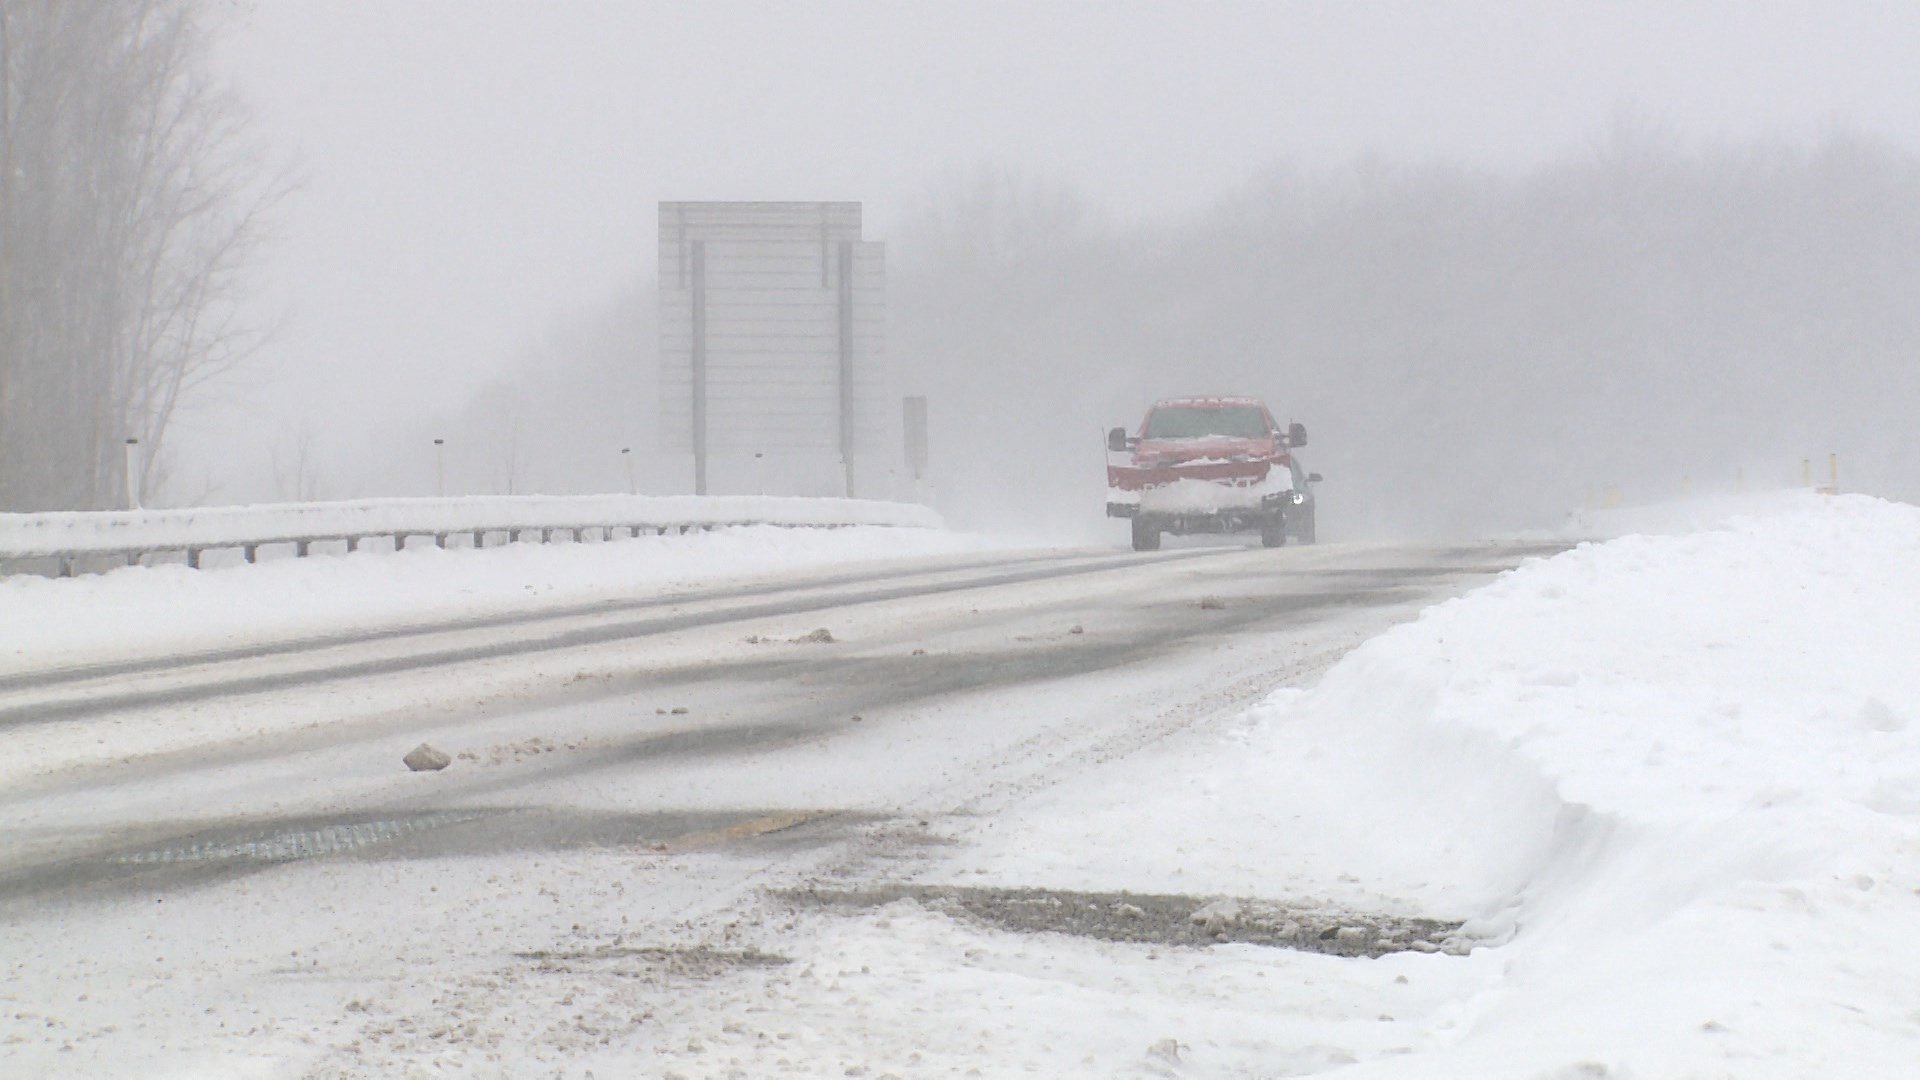 PennDOT Reduces Speed Limit on I-90 to 45 mph in Erie County